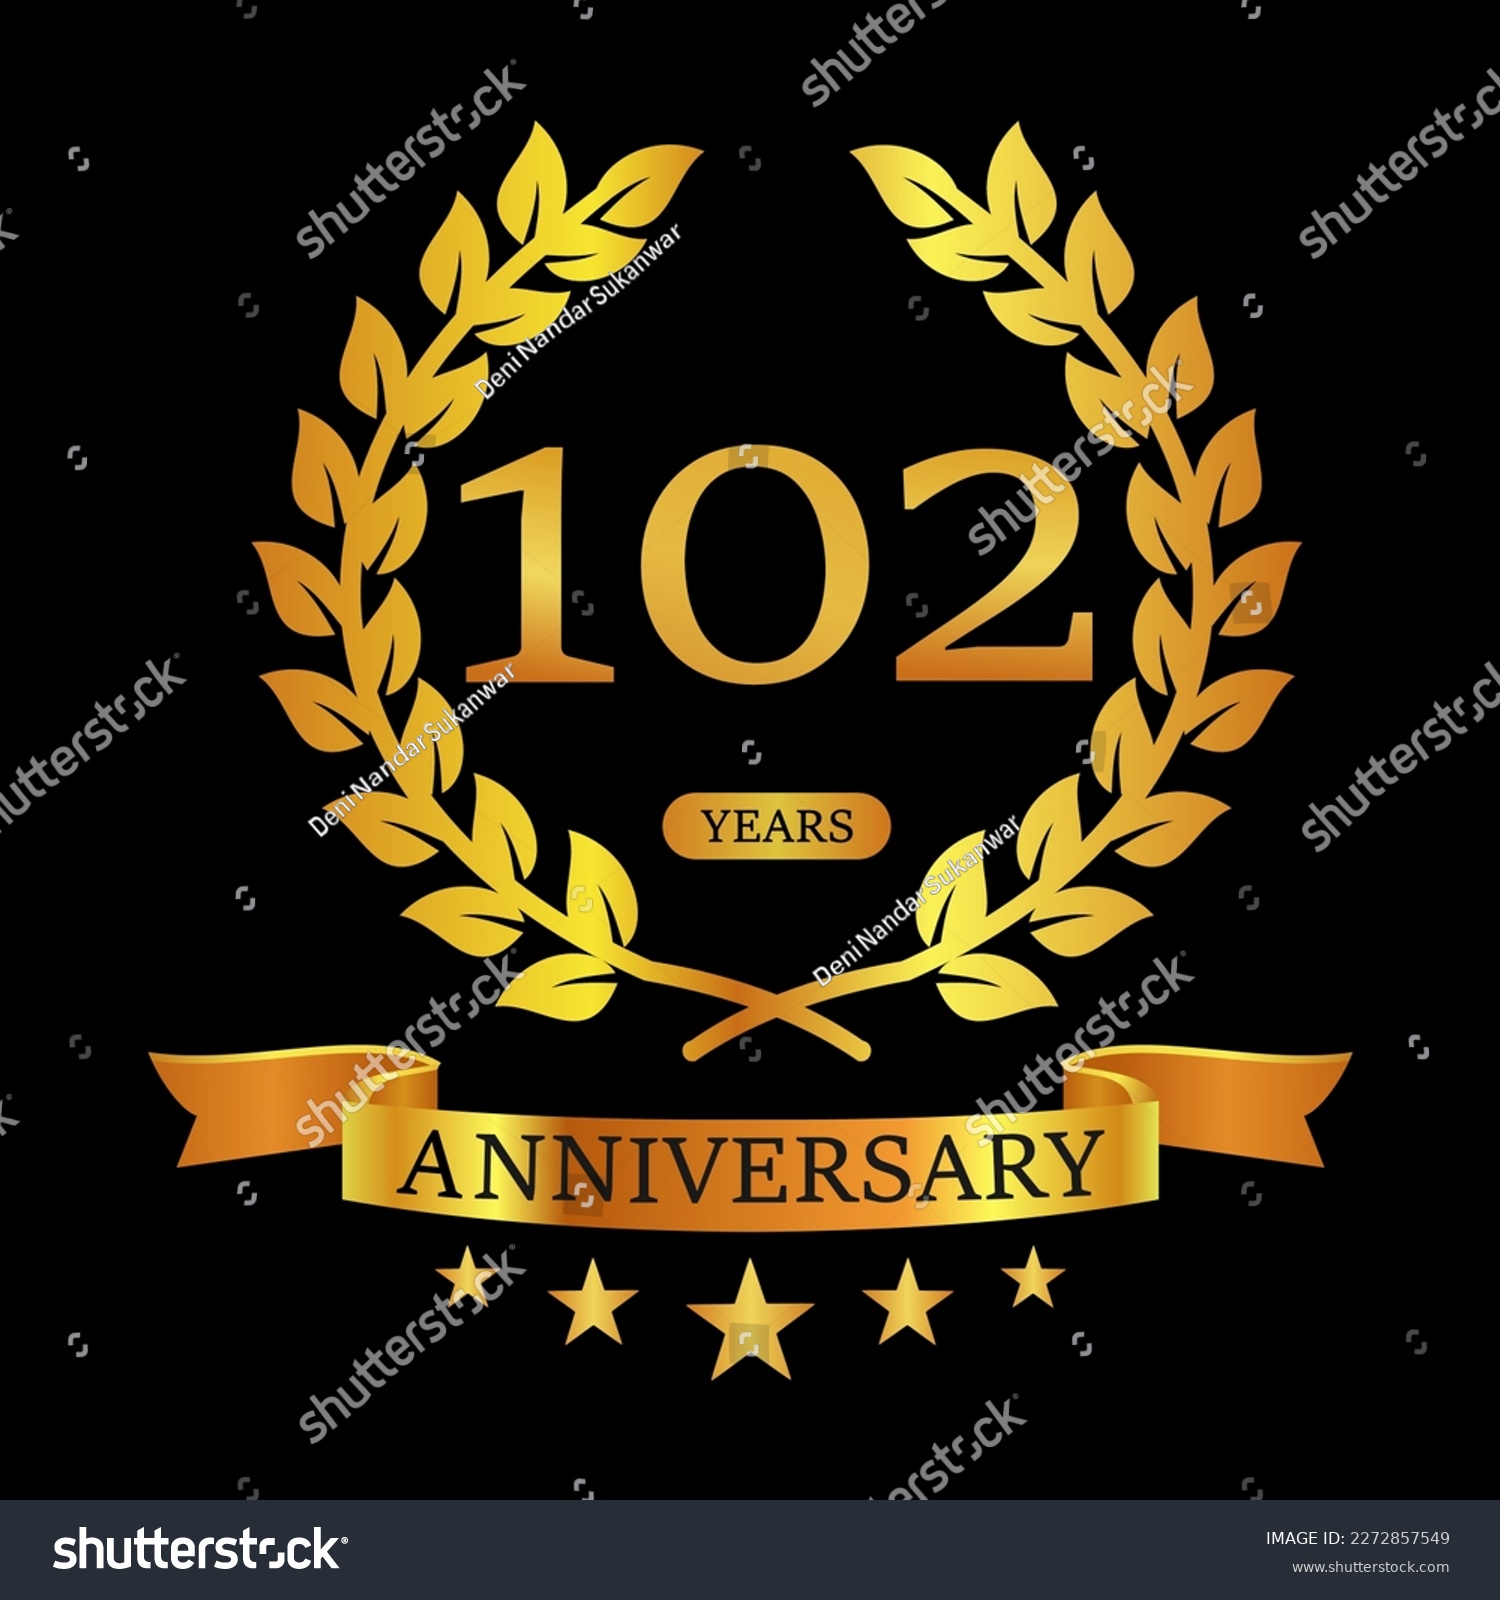 SVG of 102 th Anniversary logo template illustration. suitable for you svg